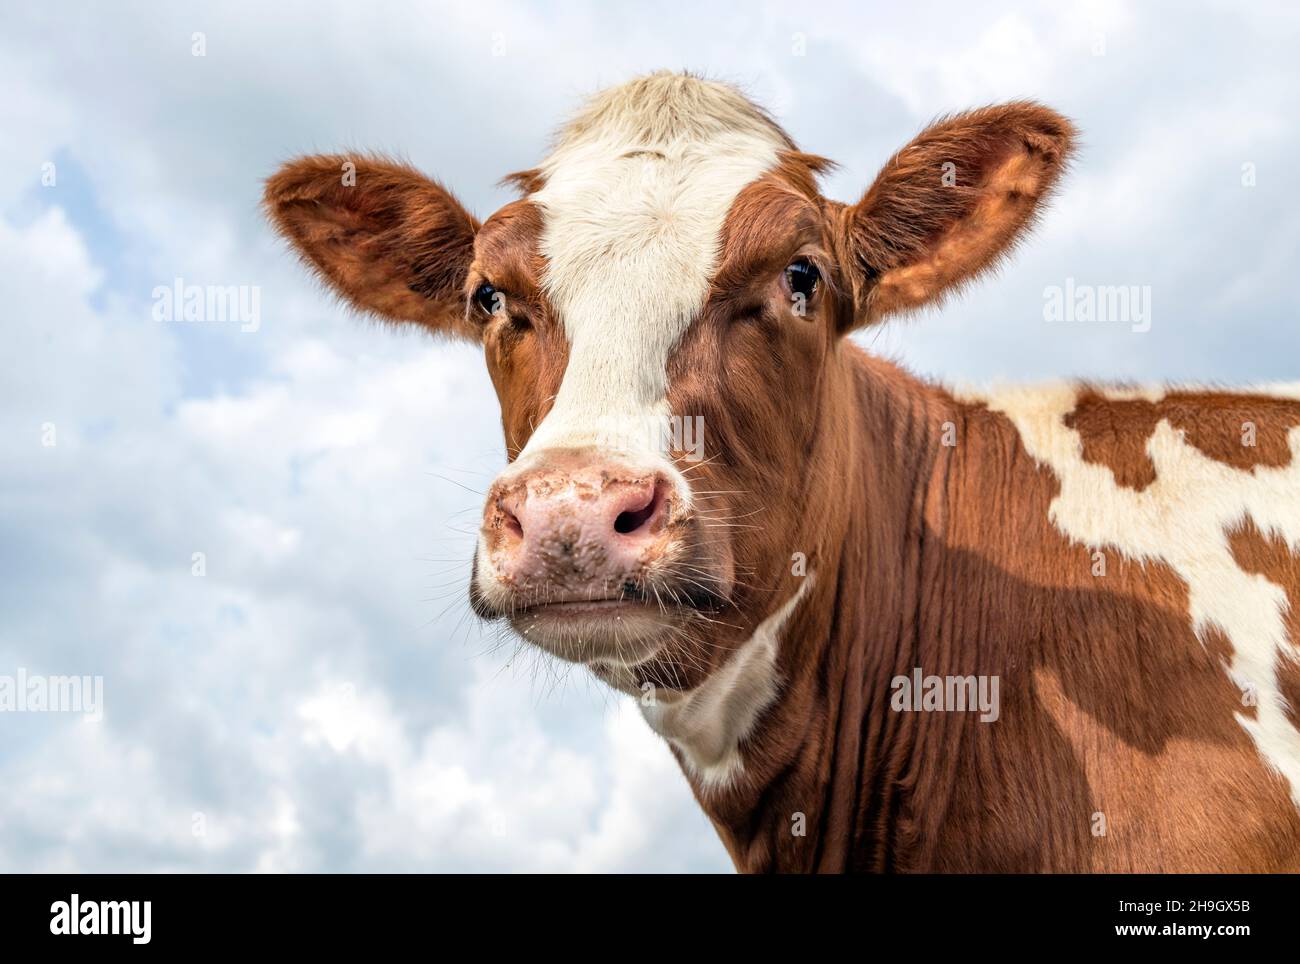 Portrait of a cow, lovely red bovine, with white blaze, pink nose and friendly and calm expression, a sky background Stock Photo